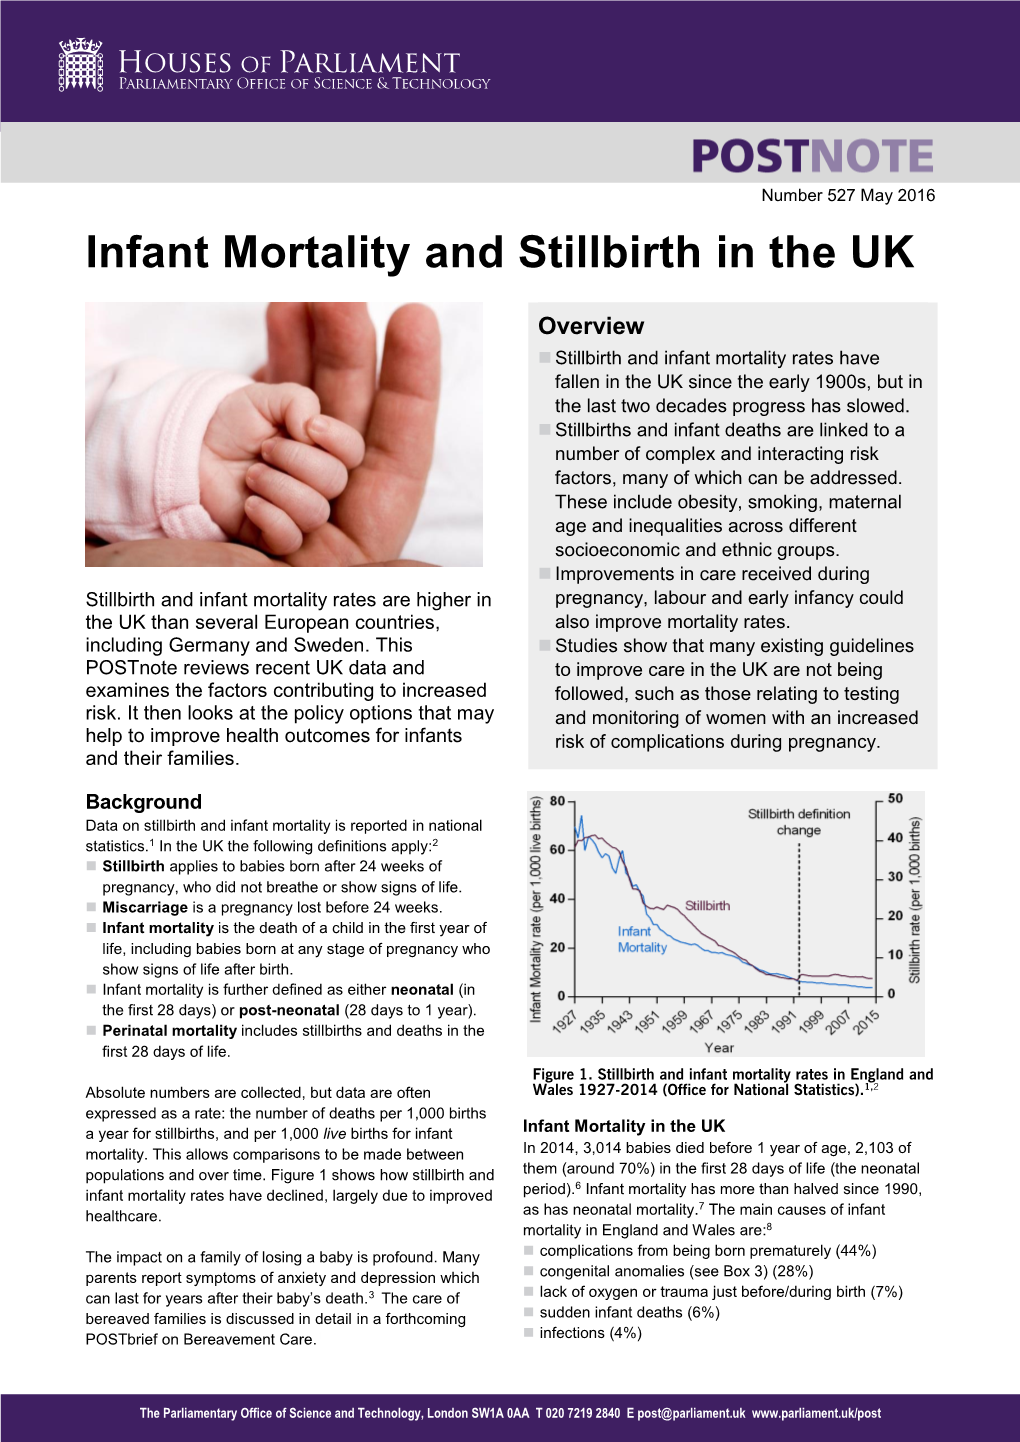 Infant Mortality and Stillbirth in the UK